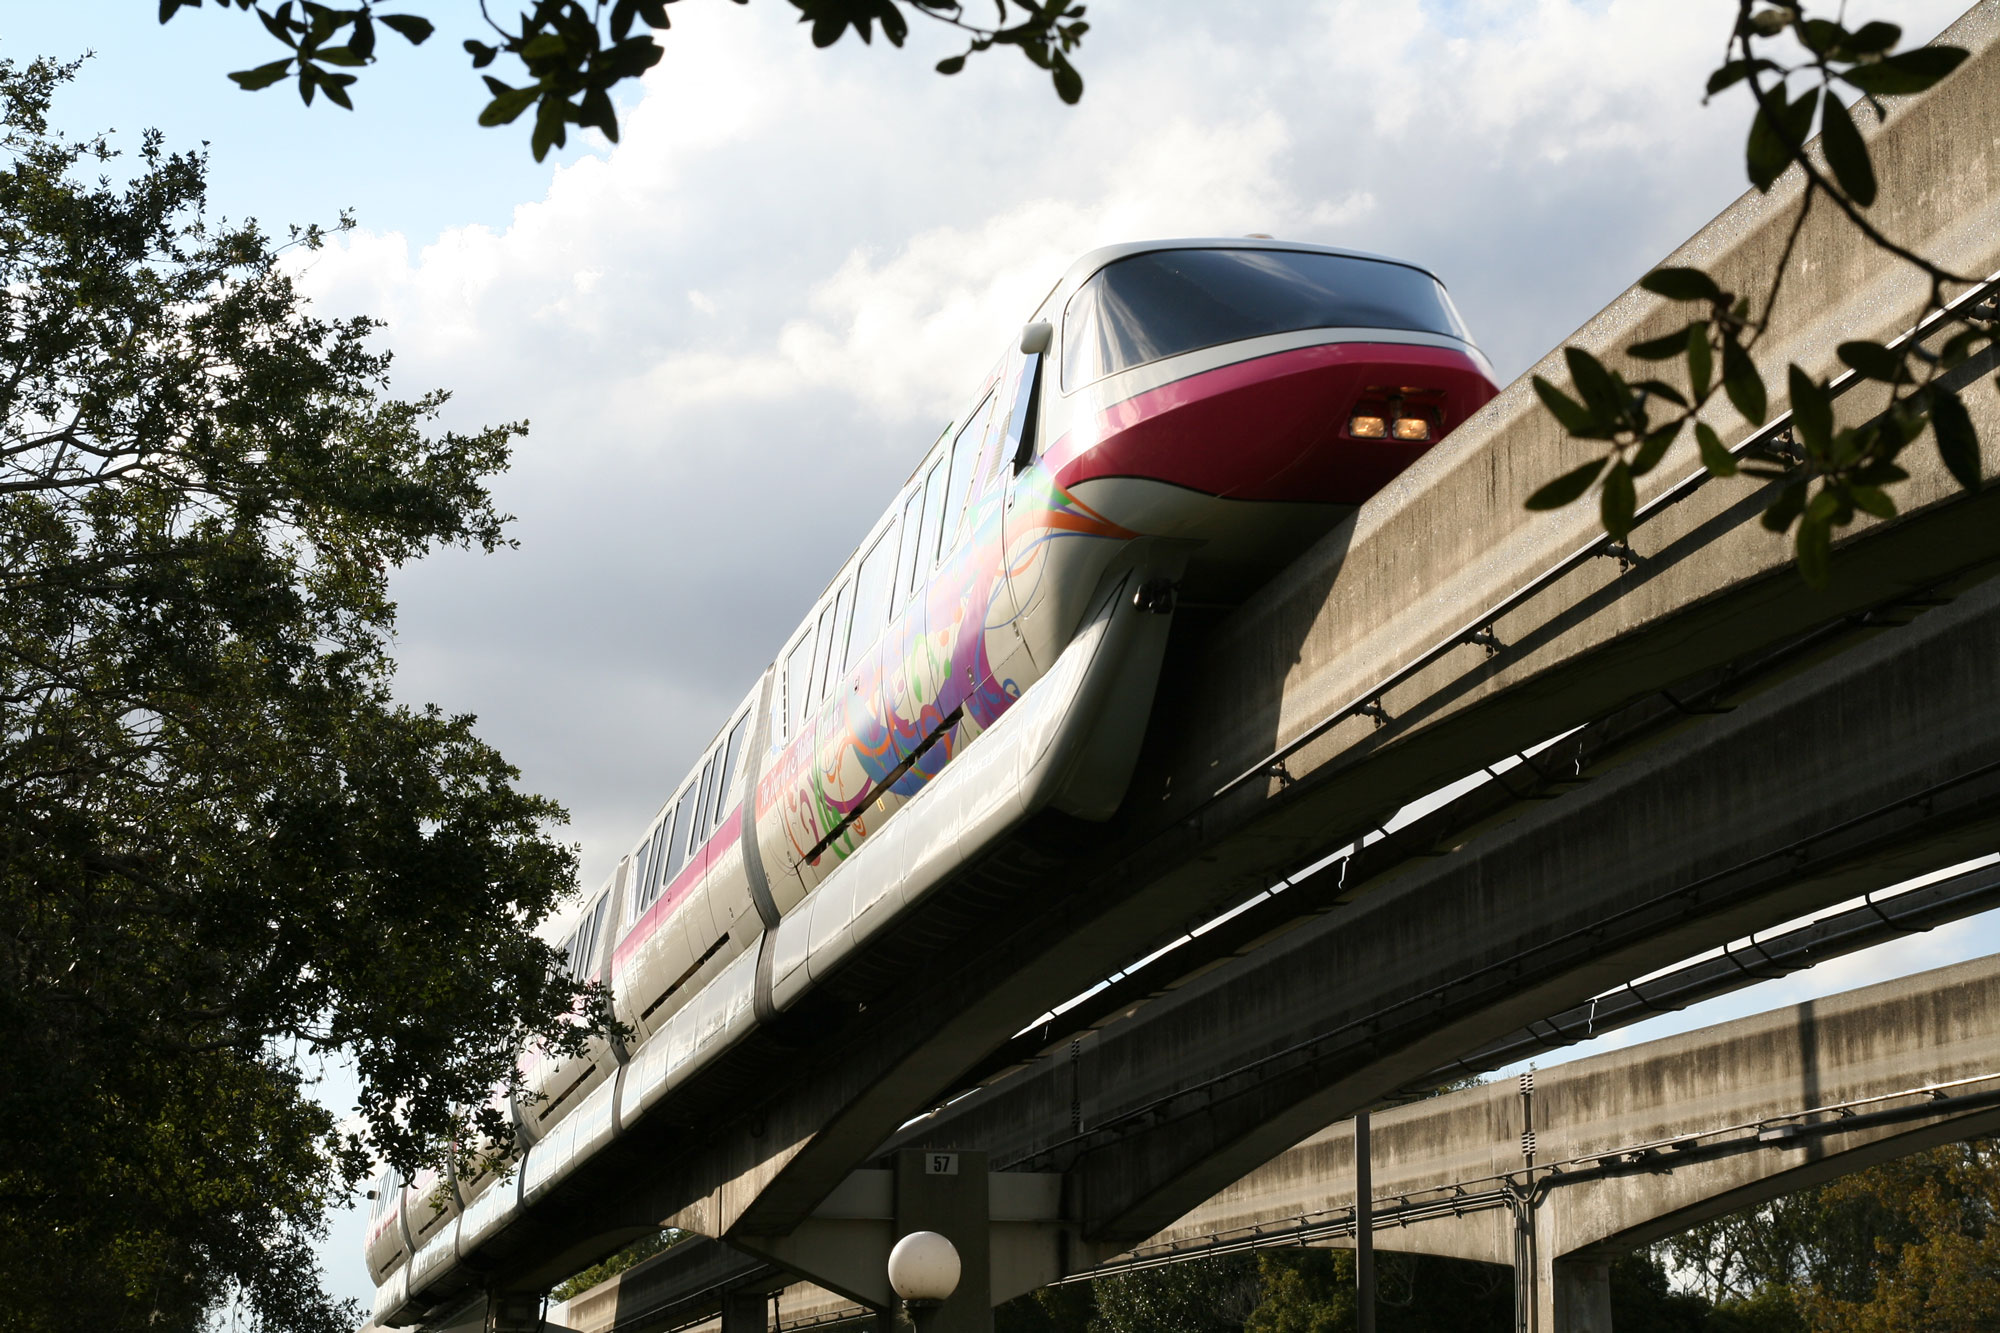 Contemporary - pink monorail